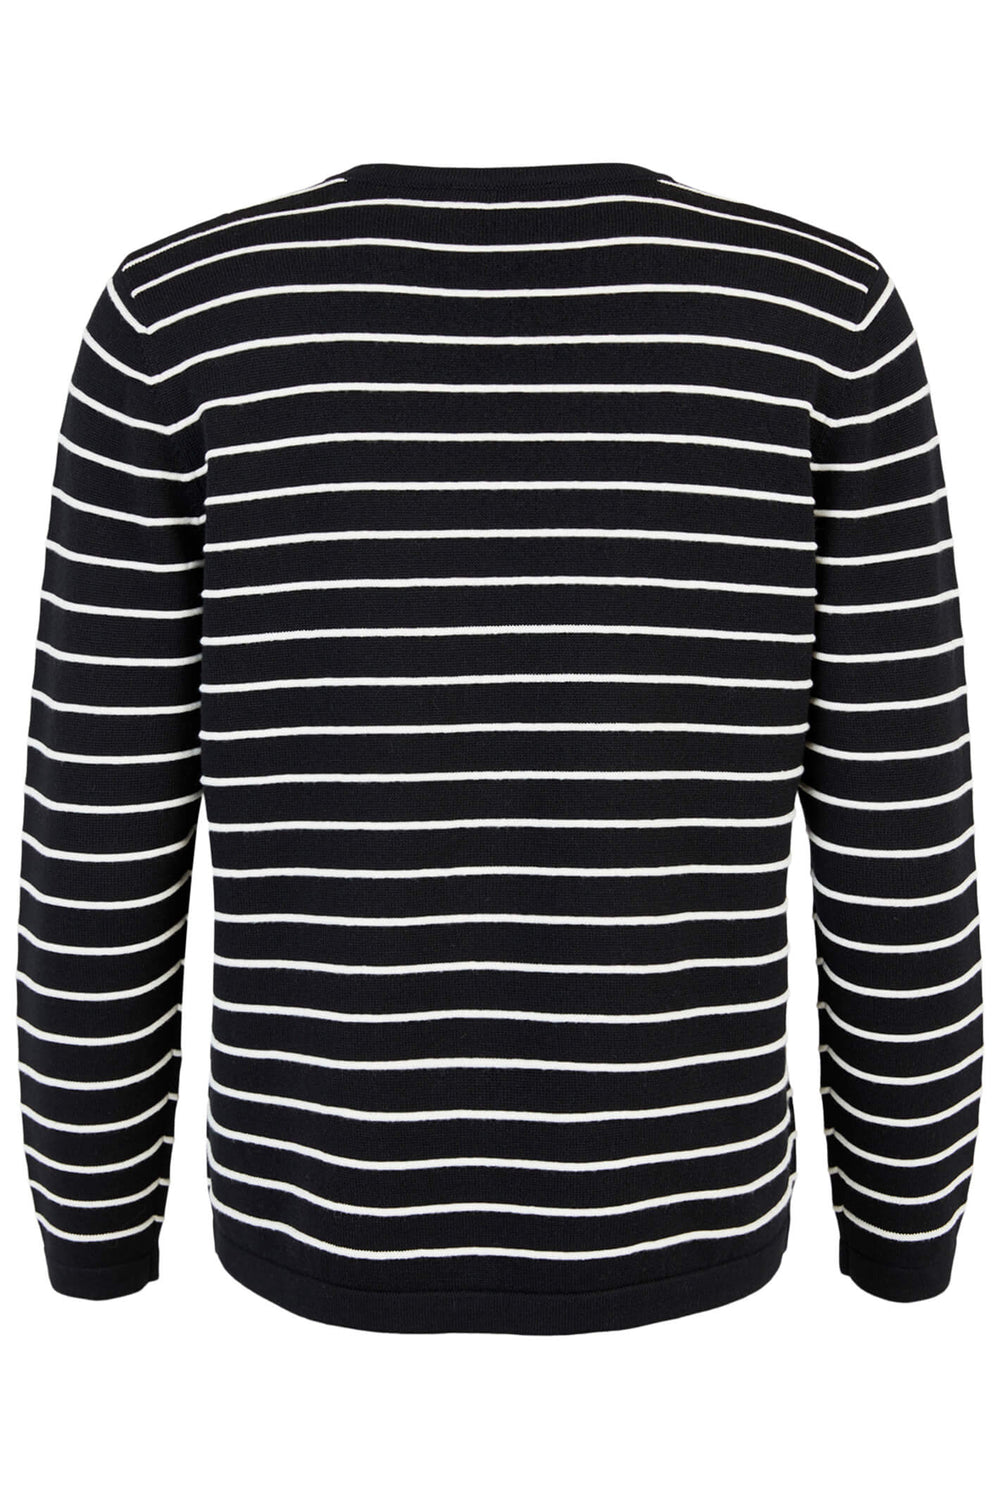 Sunday 6767 90 Black Striped Jumper - Experience Boutique